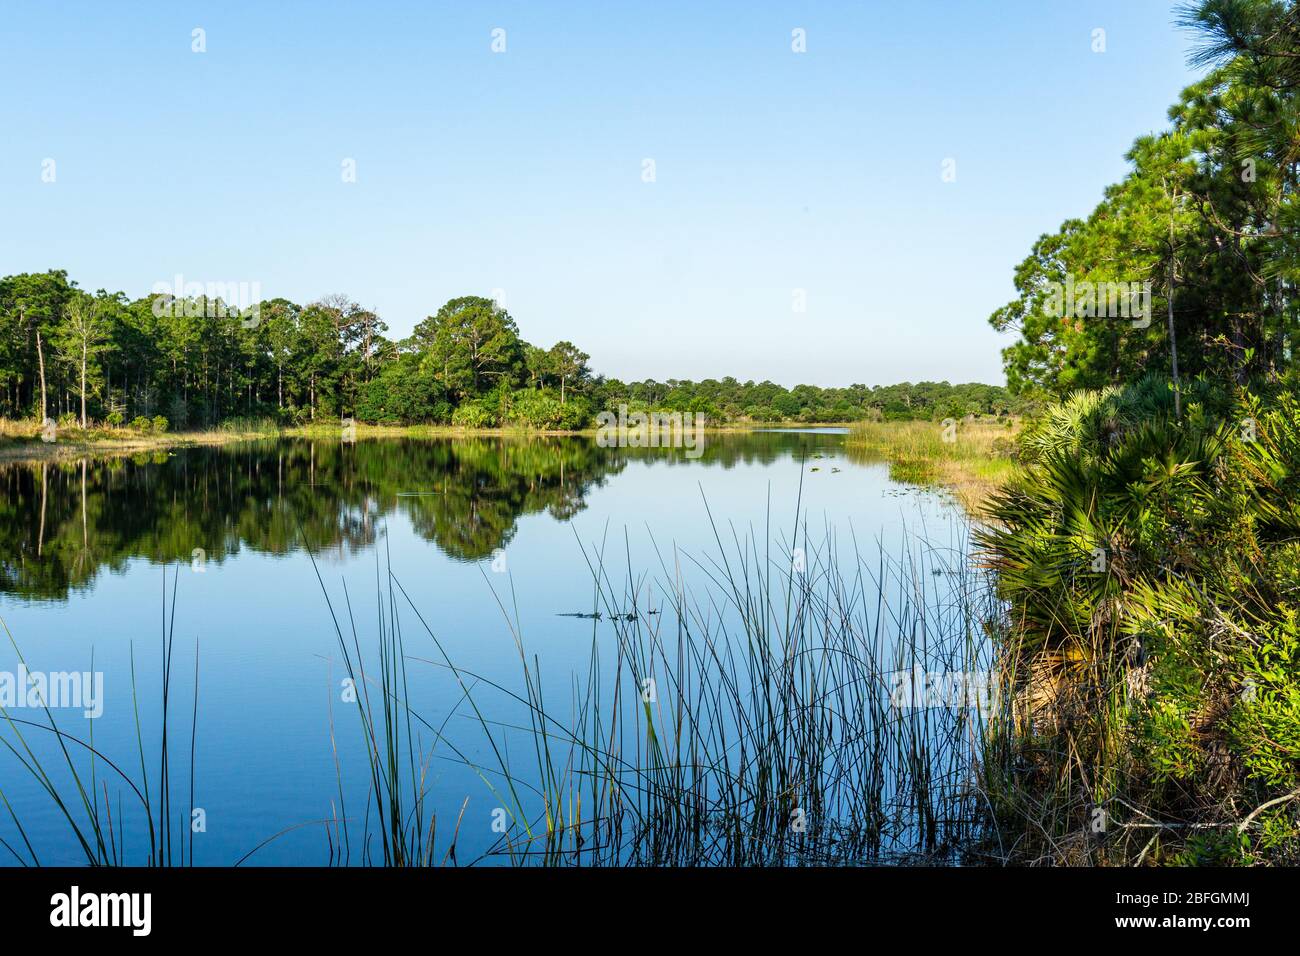 Green pine trees reflected on a smooth lake with clear blue skies, Halpatiokee Regional Park, Stuart, Florida, USA Stock Photo